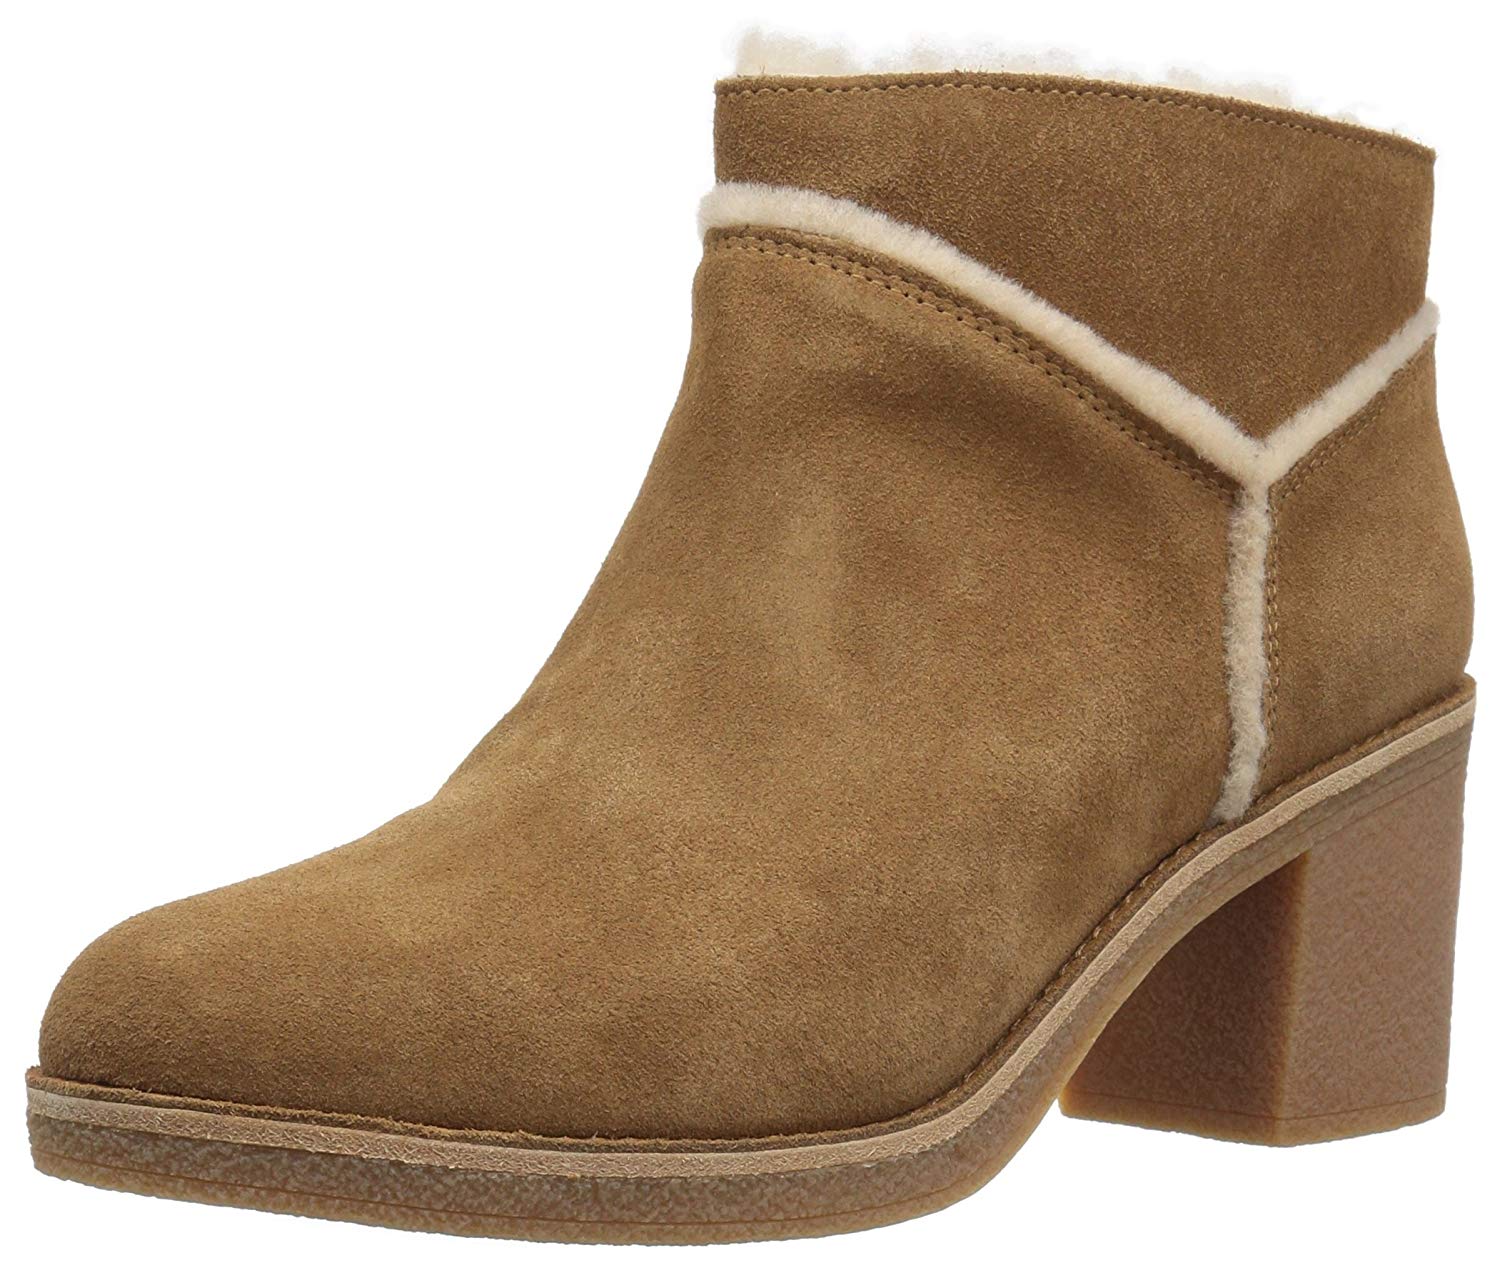 PairMySole: Ugg Australia Womens Kasen Closed Toe Ankle Cold Weather ...